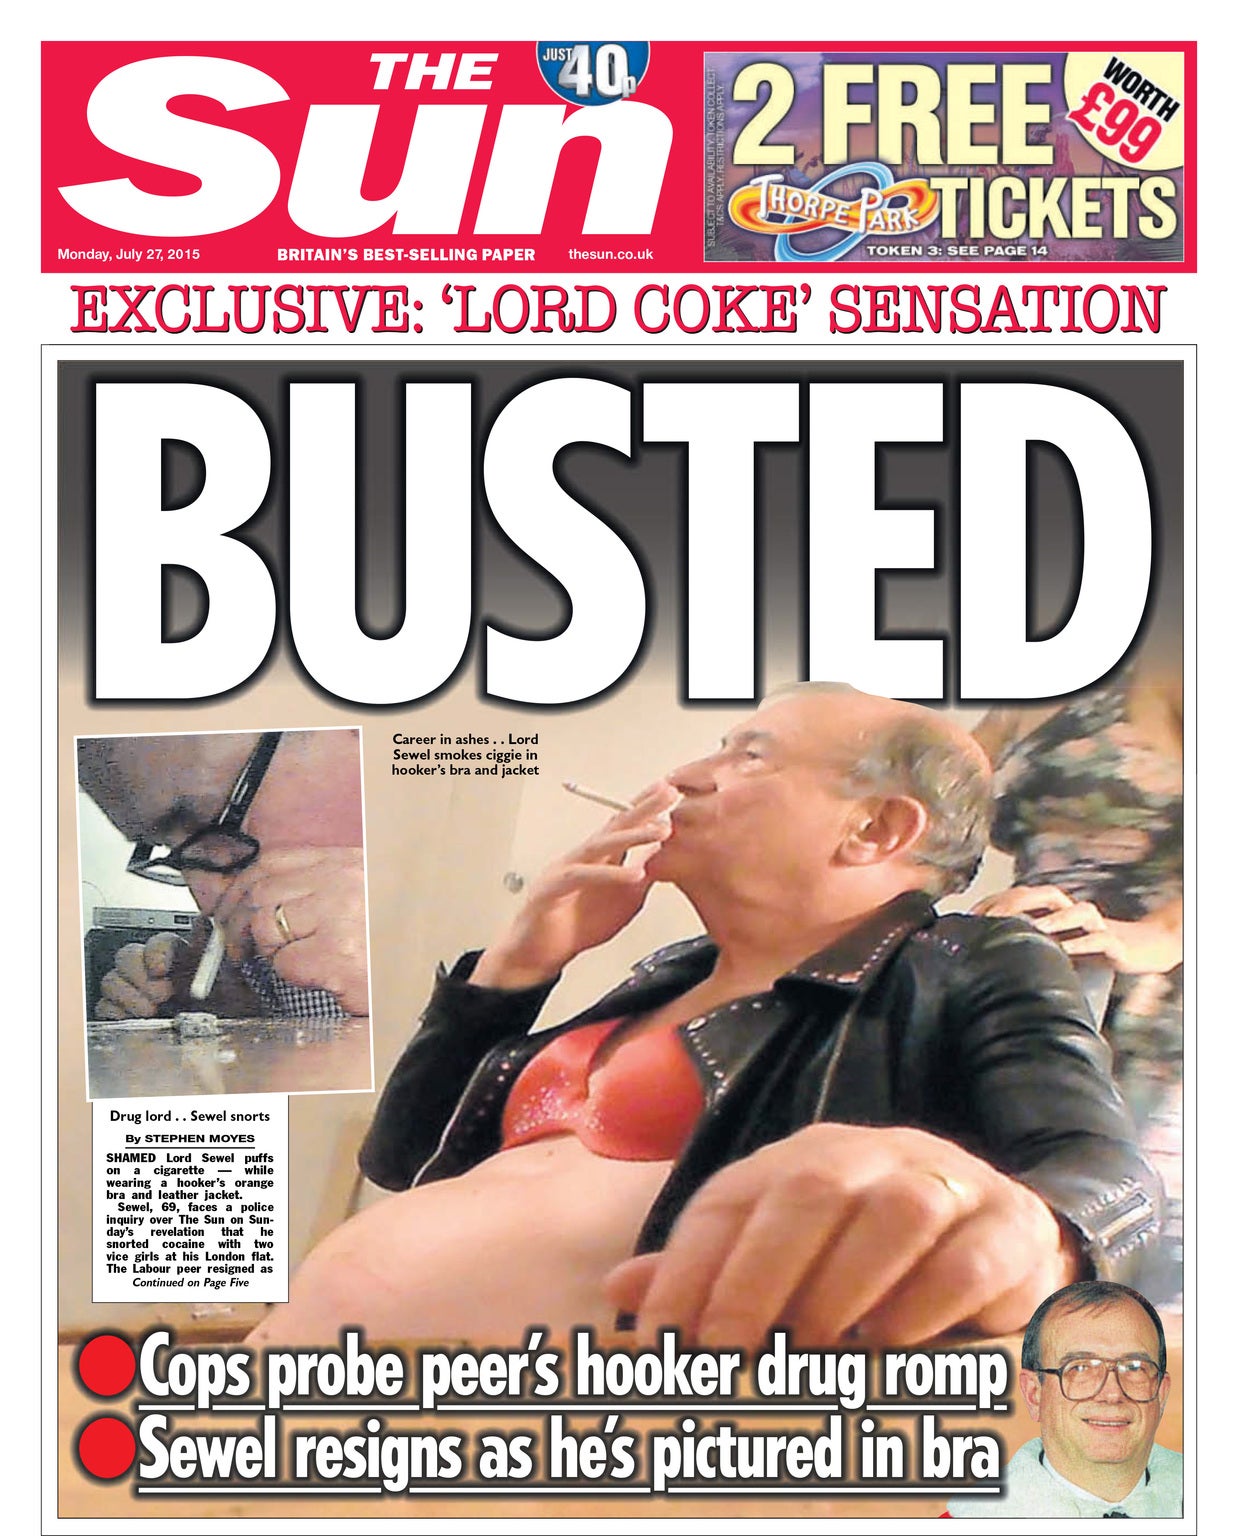 Lord Sewell resigned in 2015 after a drug and prostitution scandal